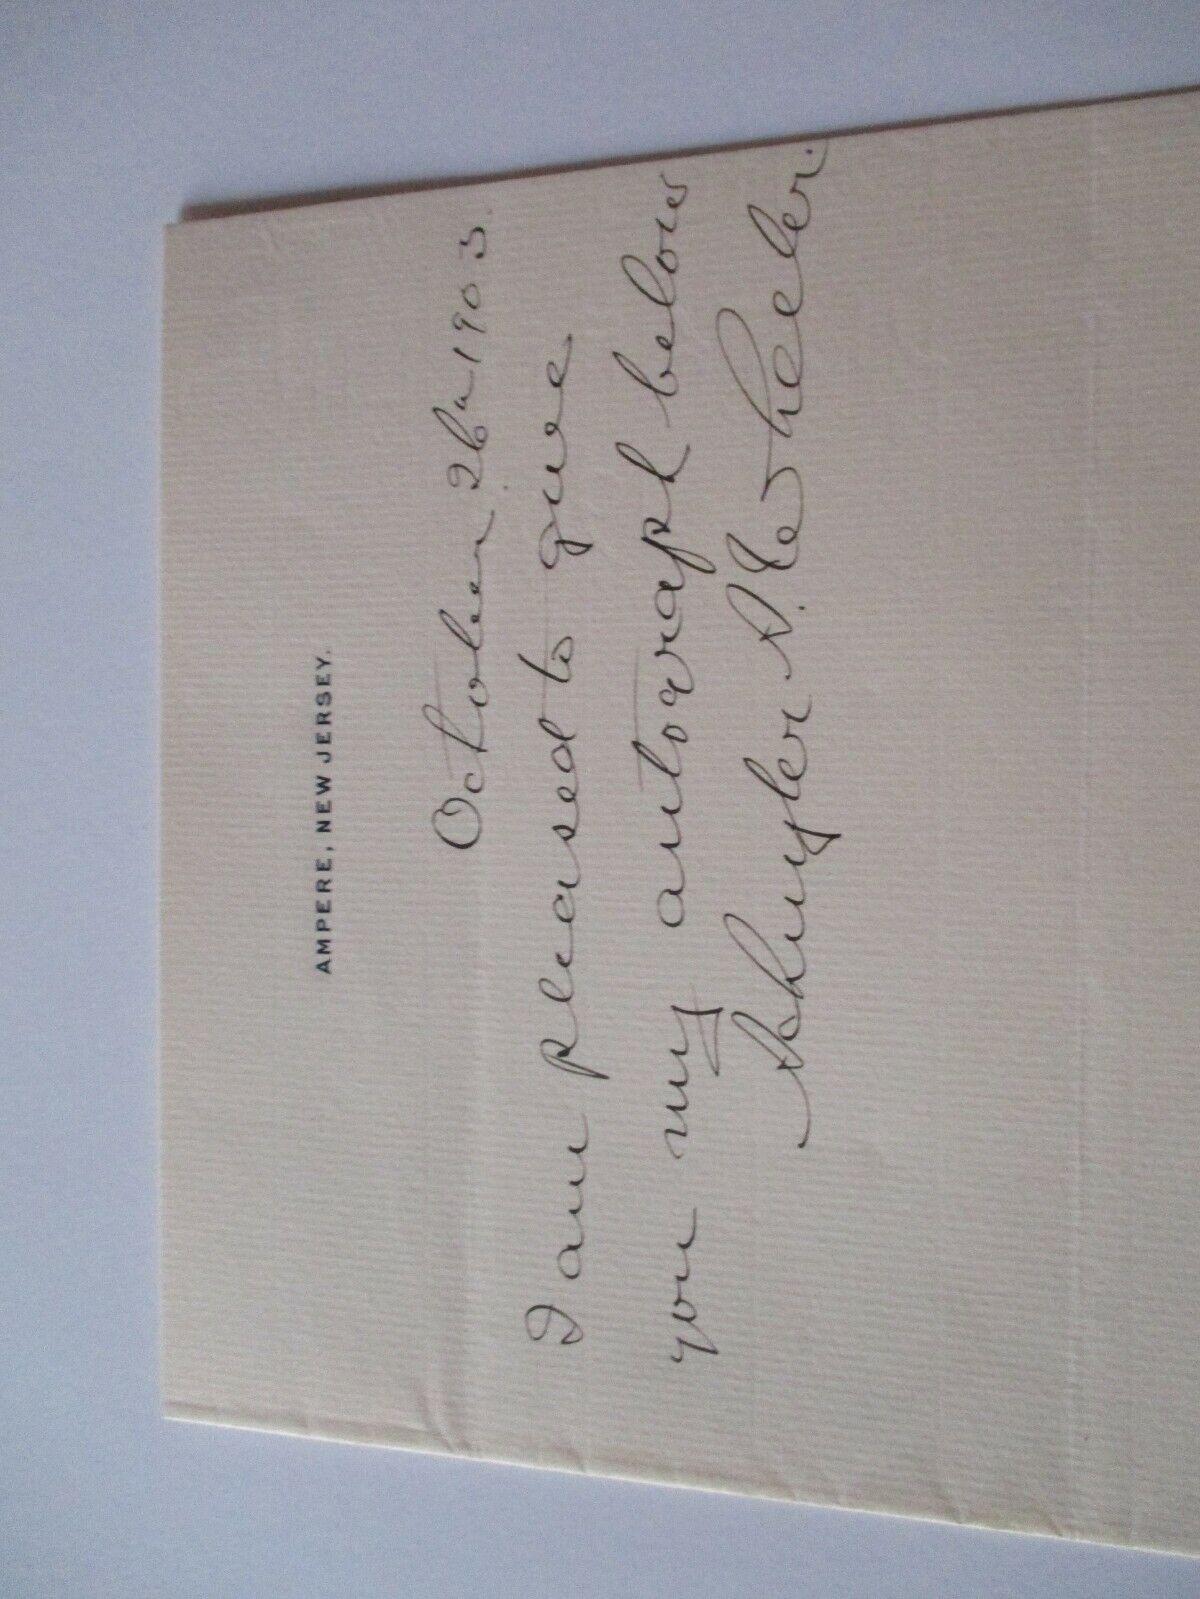 SCHUYLER WHEELER LETTER 1903 ANTIQUE FAMOUS AMERICAN ELECTRICAL ENGINEER INVENT